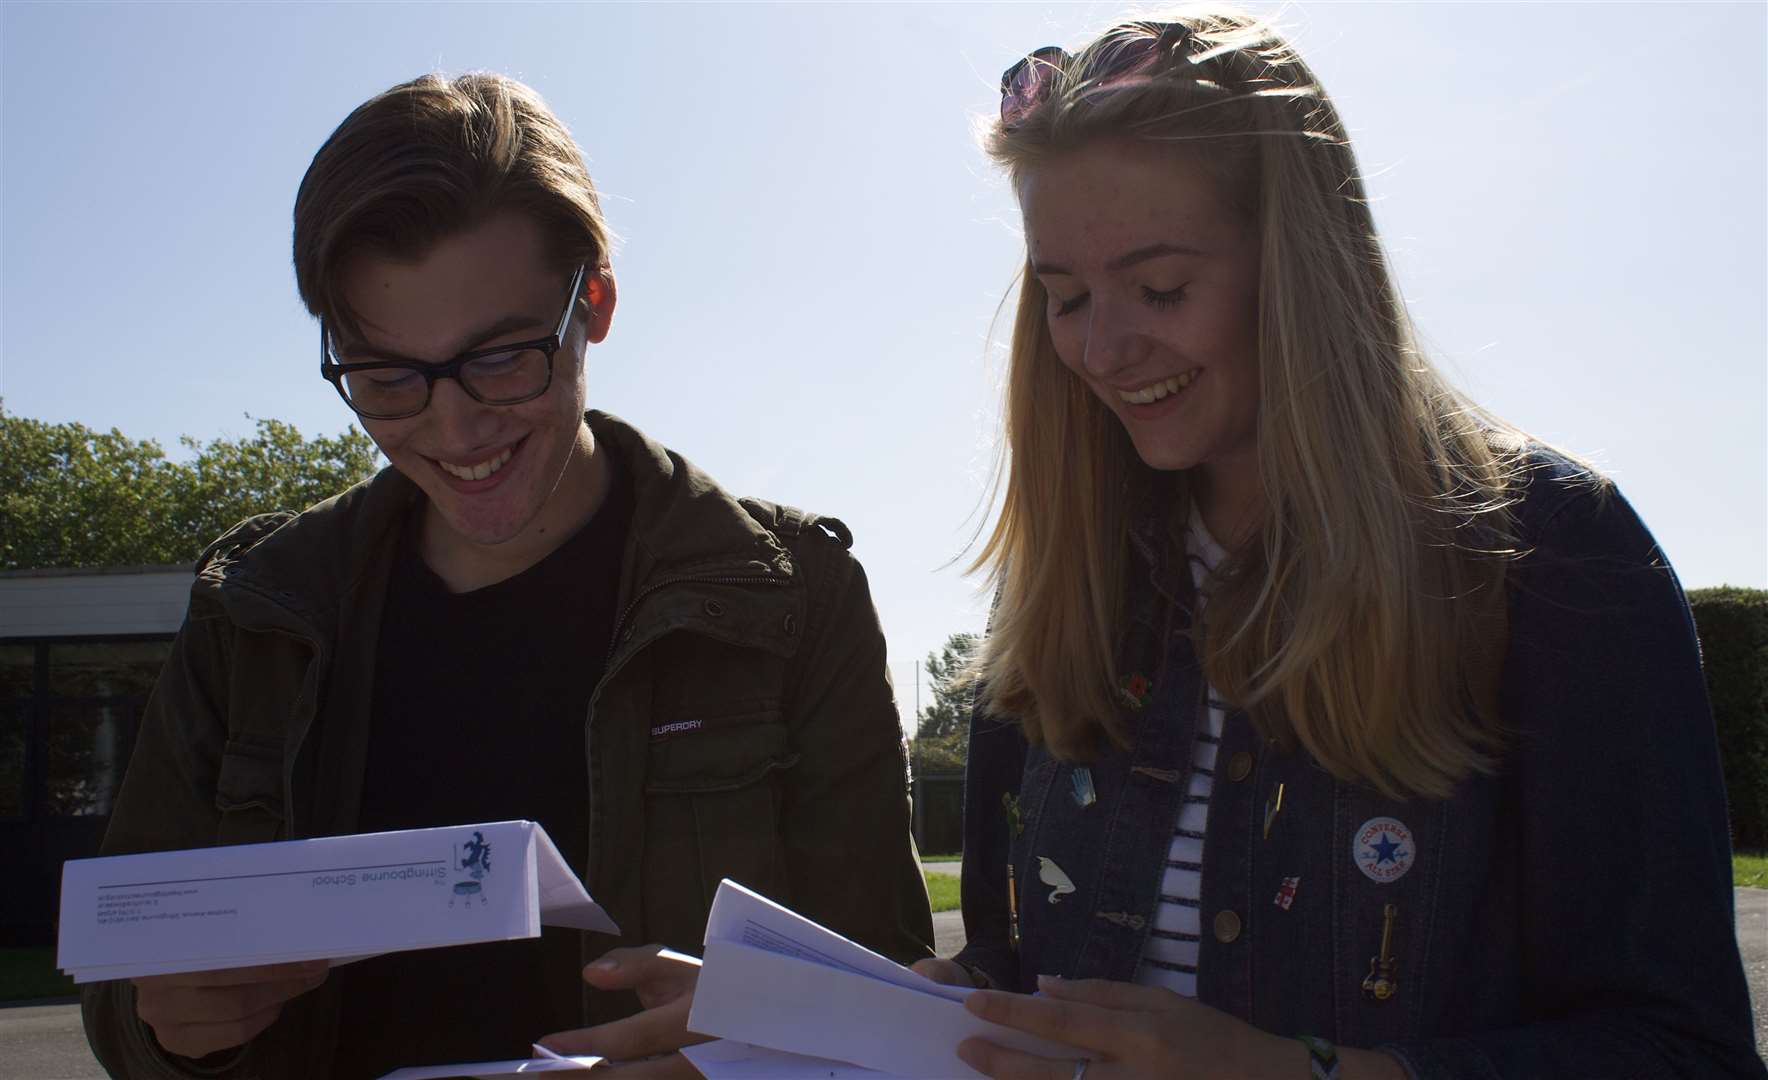 Alfie Gevaux-Ross and Katie Spender compare results at The Sittingbourne School